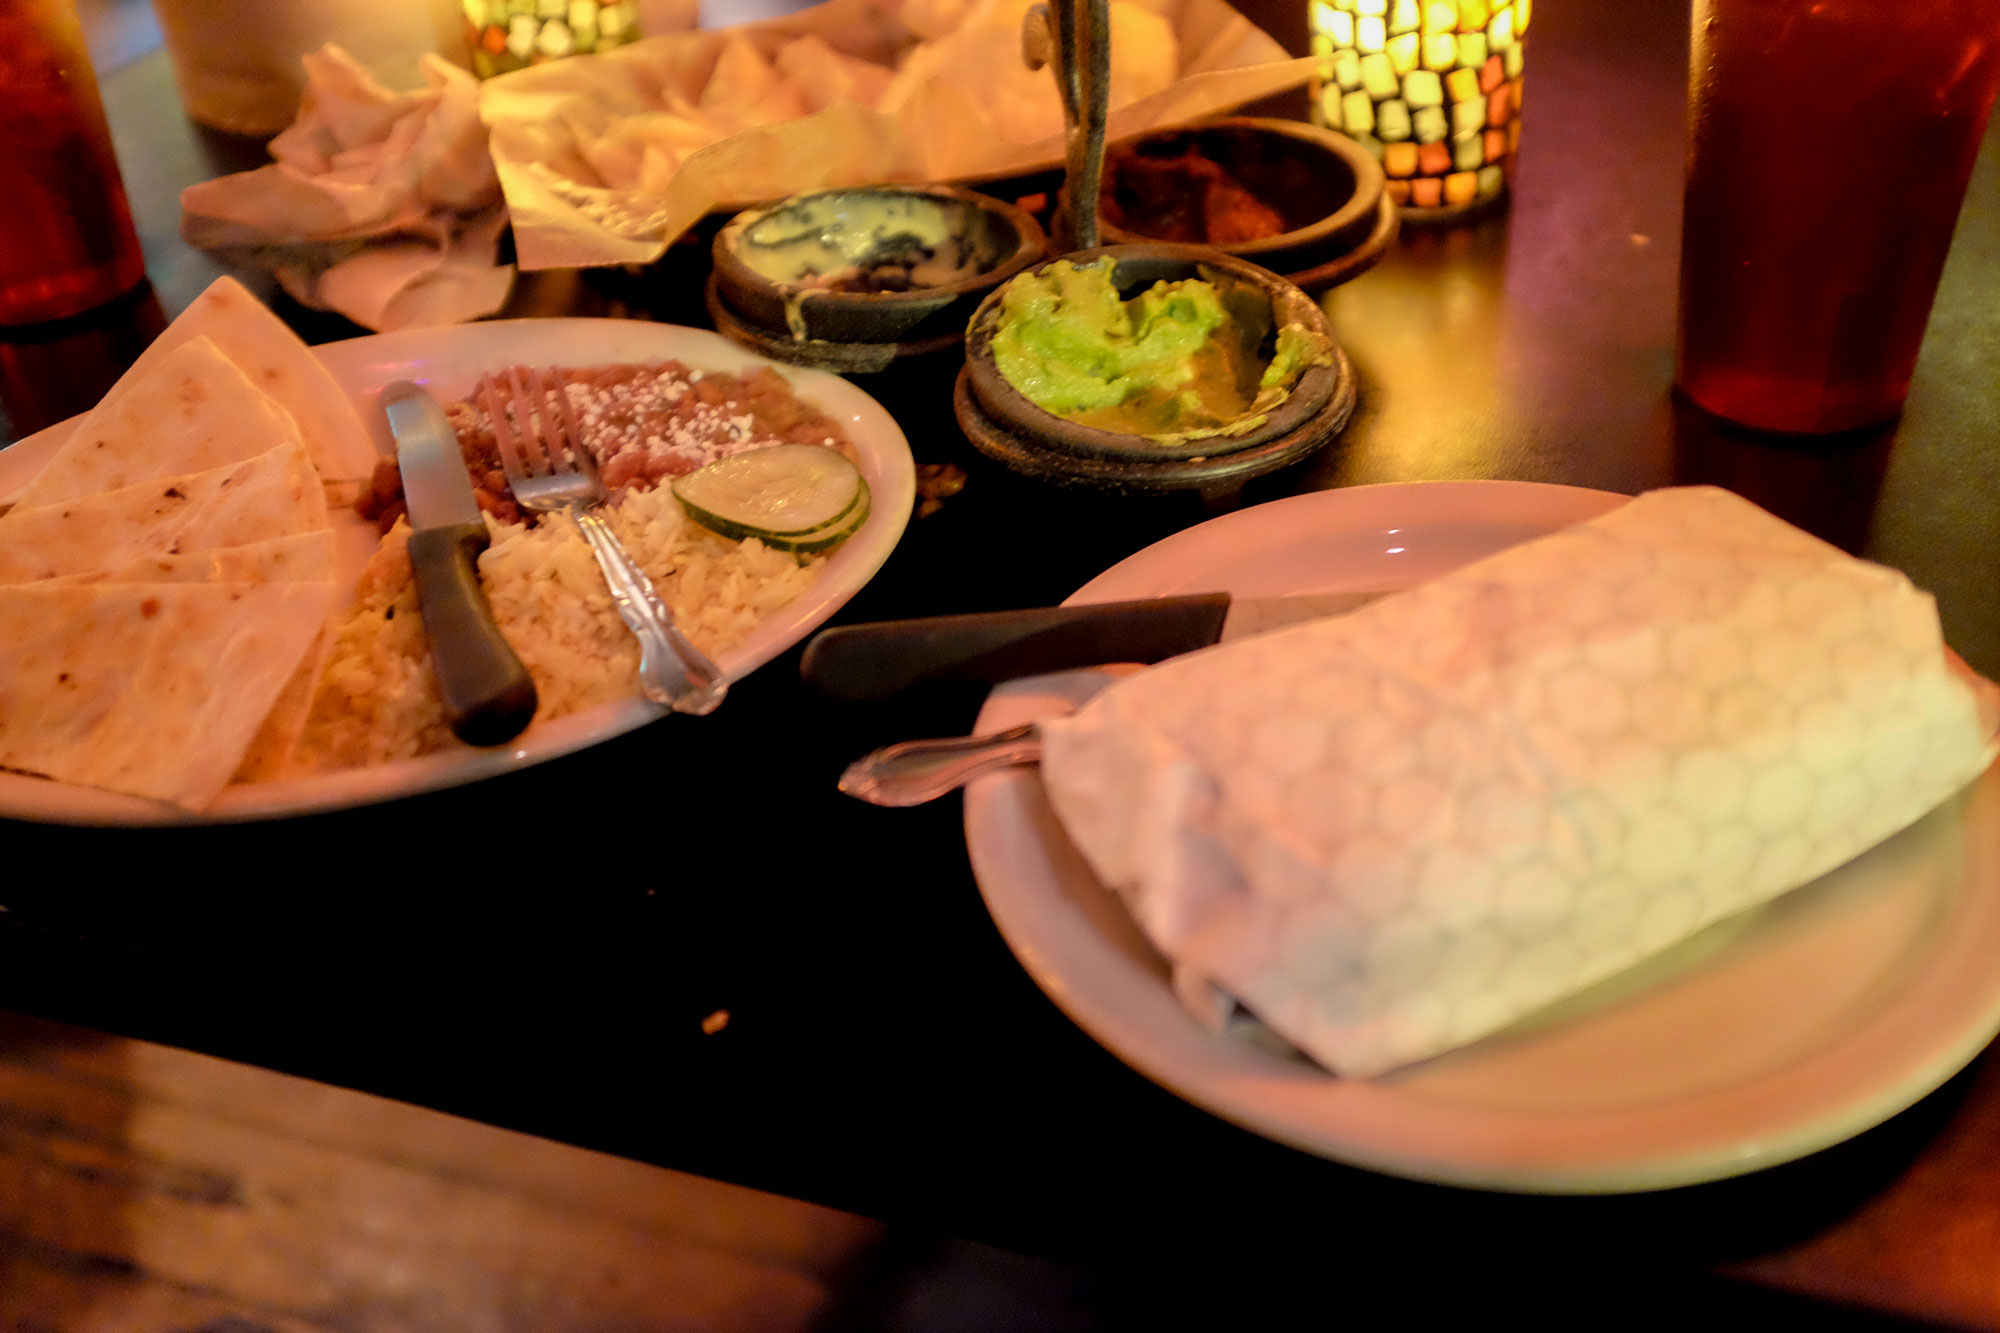 table with dishes from El Rey burrito lounge with a very large burrito